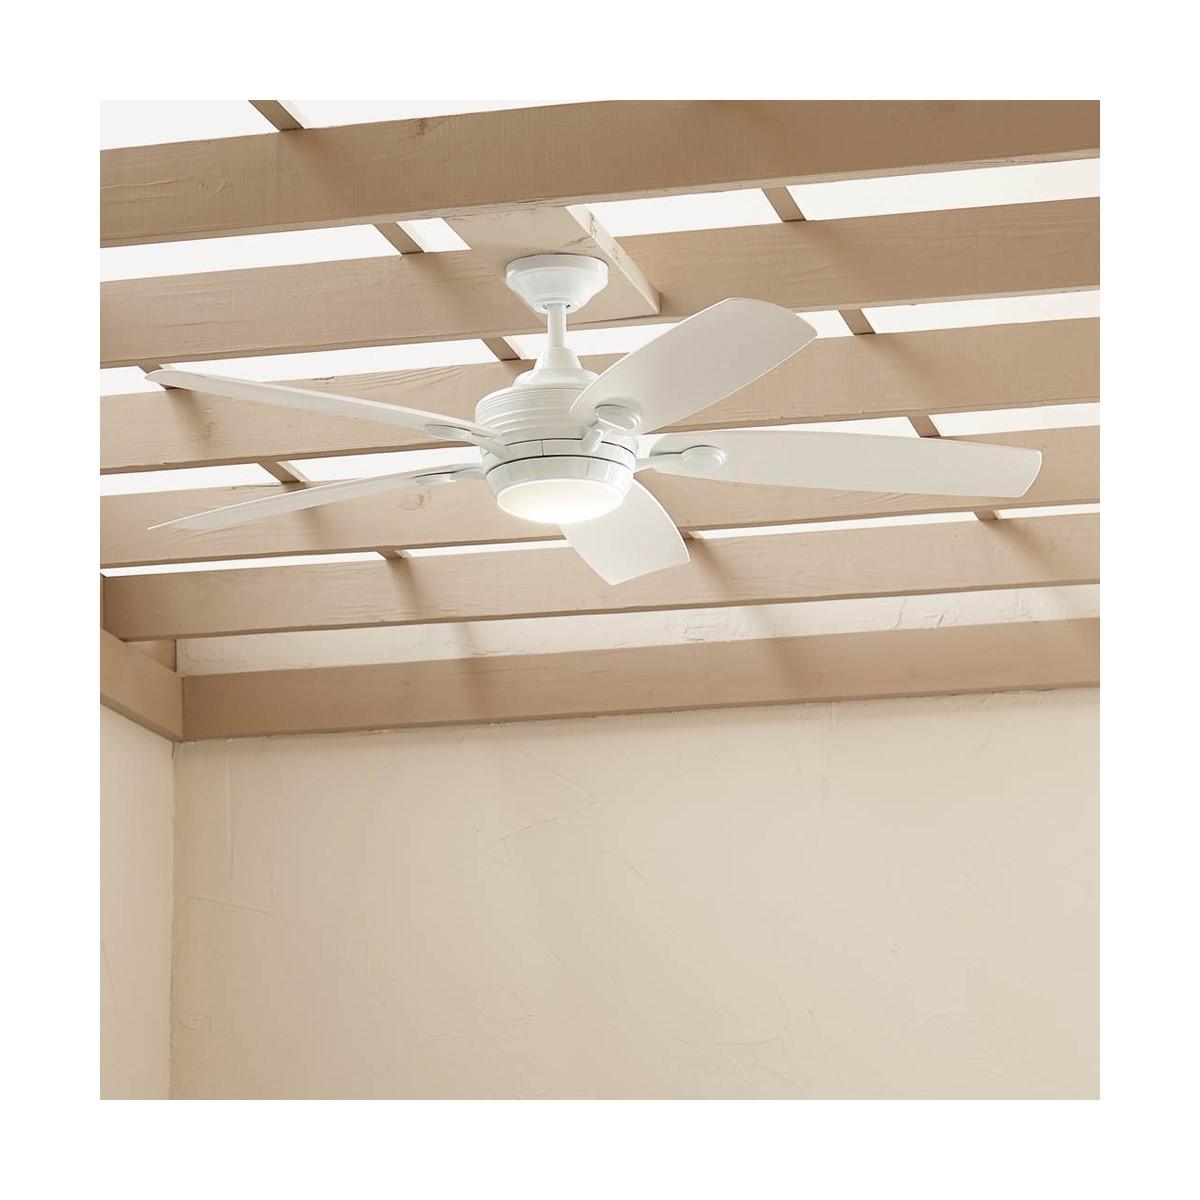 Tranquil 56 Inch Outdoor Ceiling Fan With Light And Remote, Marine Grade